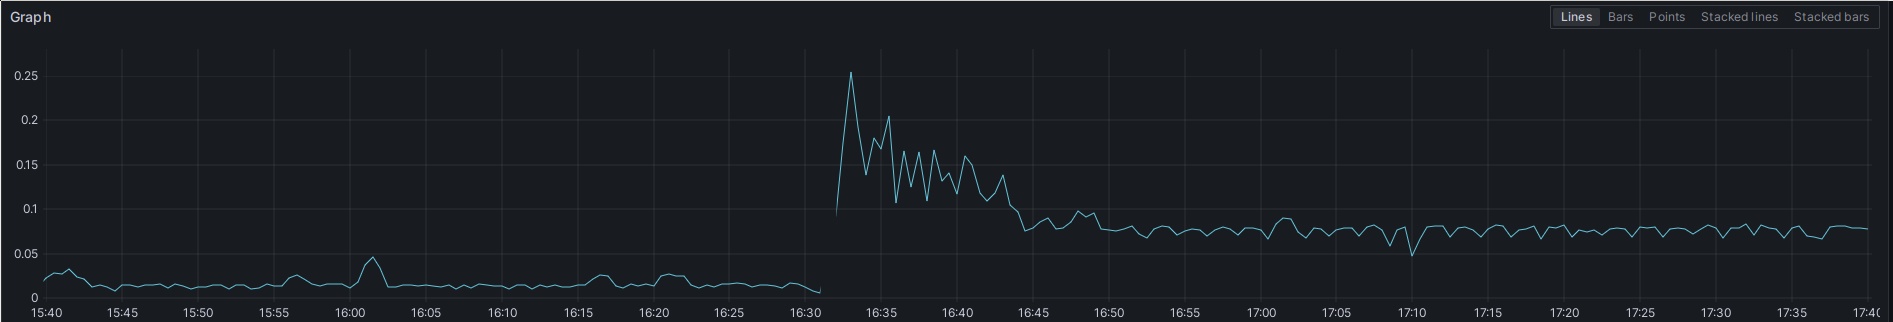 A screenshot of a Grafana time series panel. It shows the CPU usage of the Prometheus container from 15:40 to 17:40. In the interval from the start to 16:30, the CPU usage hovers at around 0.0125. Then there is a short break in the graph, and it continues around 16:32, but with a higher baseline, hovering around 0.0906 instead after a short period of usage up to 0.25.